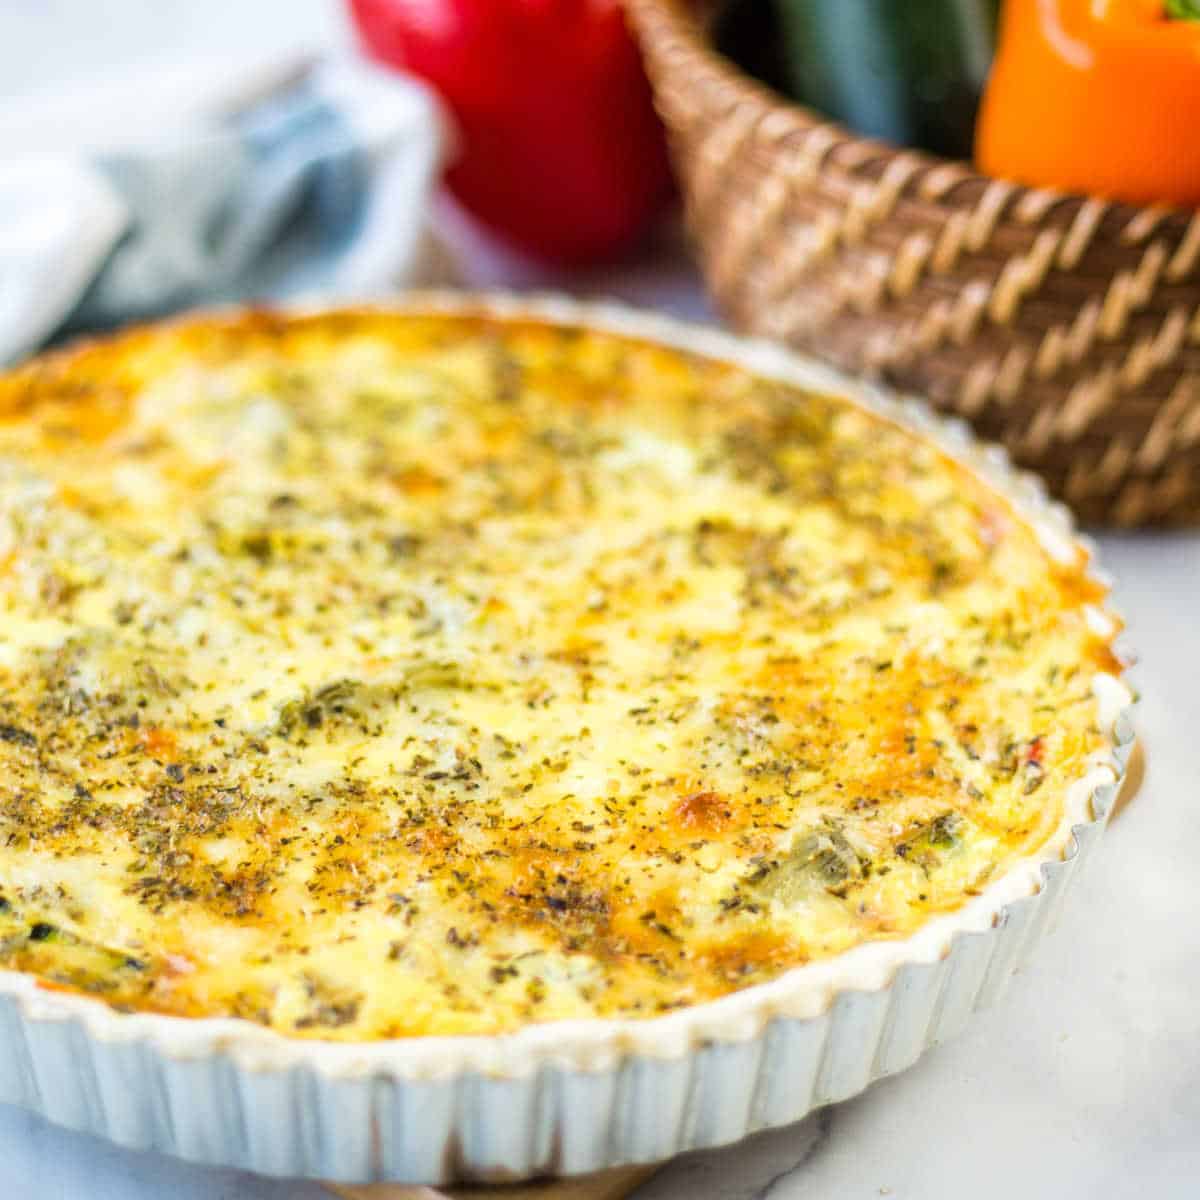 baked quiche in a tart pan